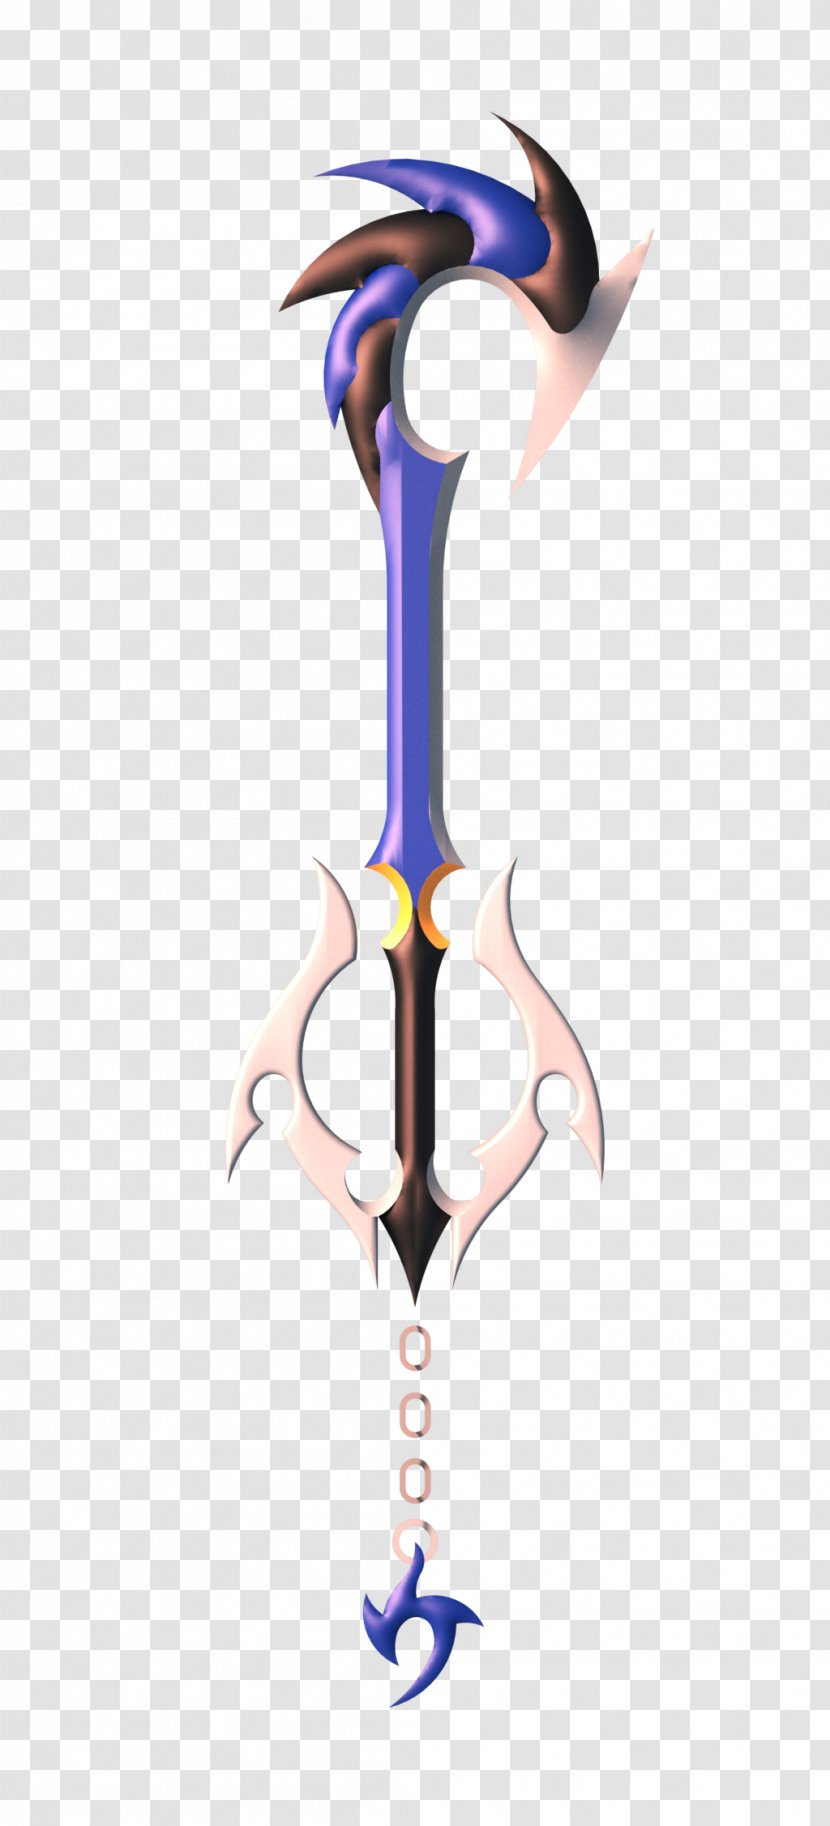 Clip Art Weapon - Cold - Kingdom Hearts 358/2 Days Characters Transparent PNG